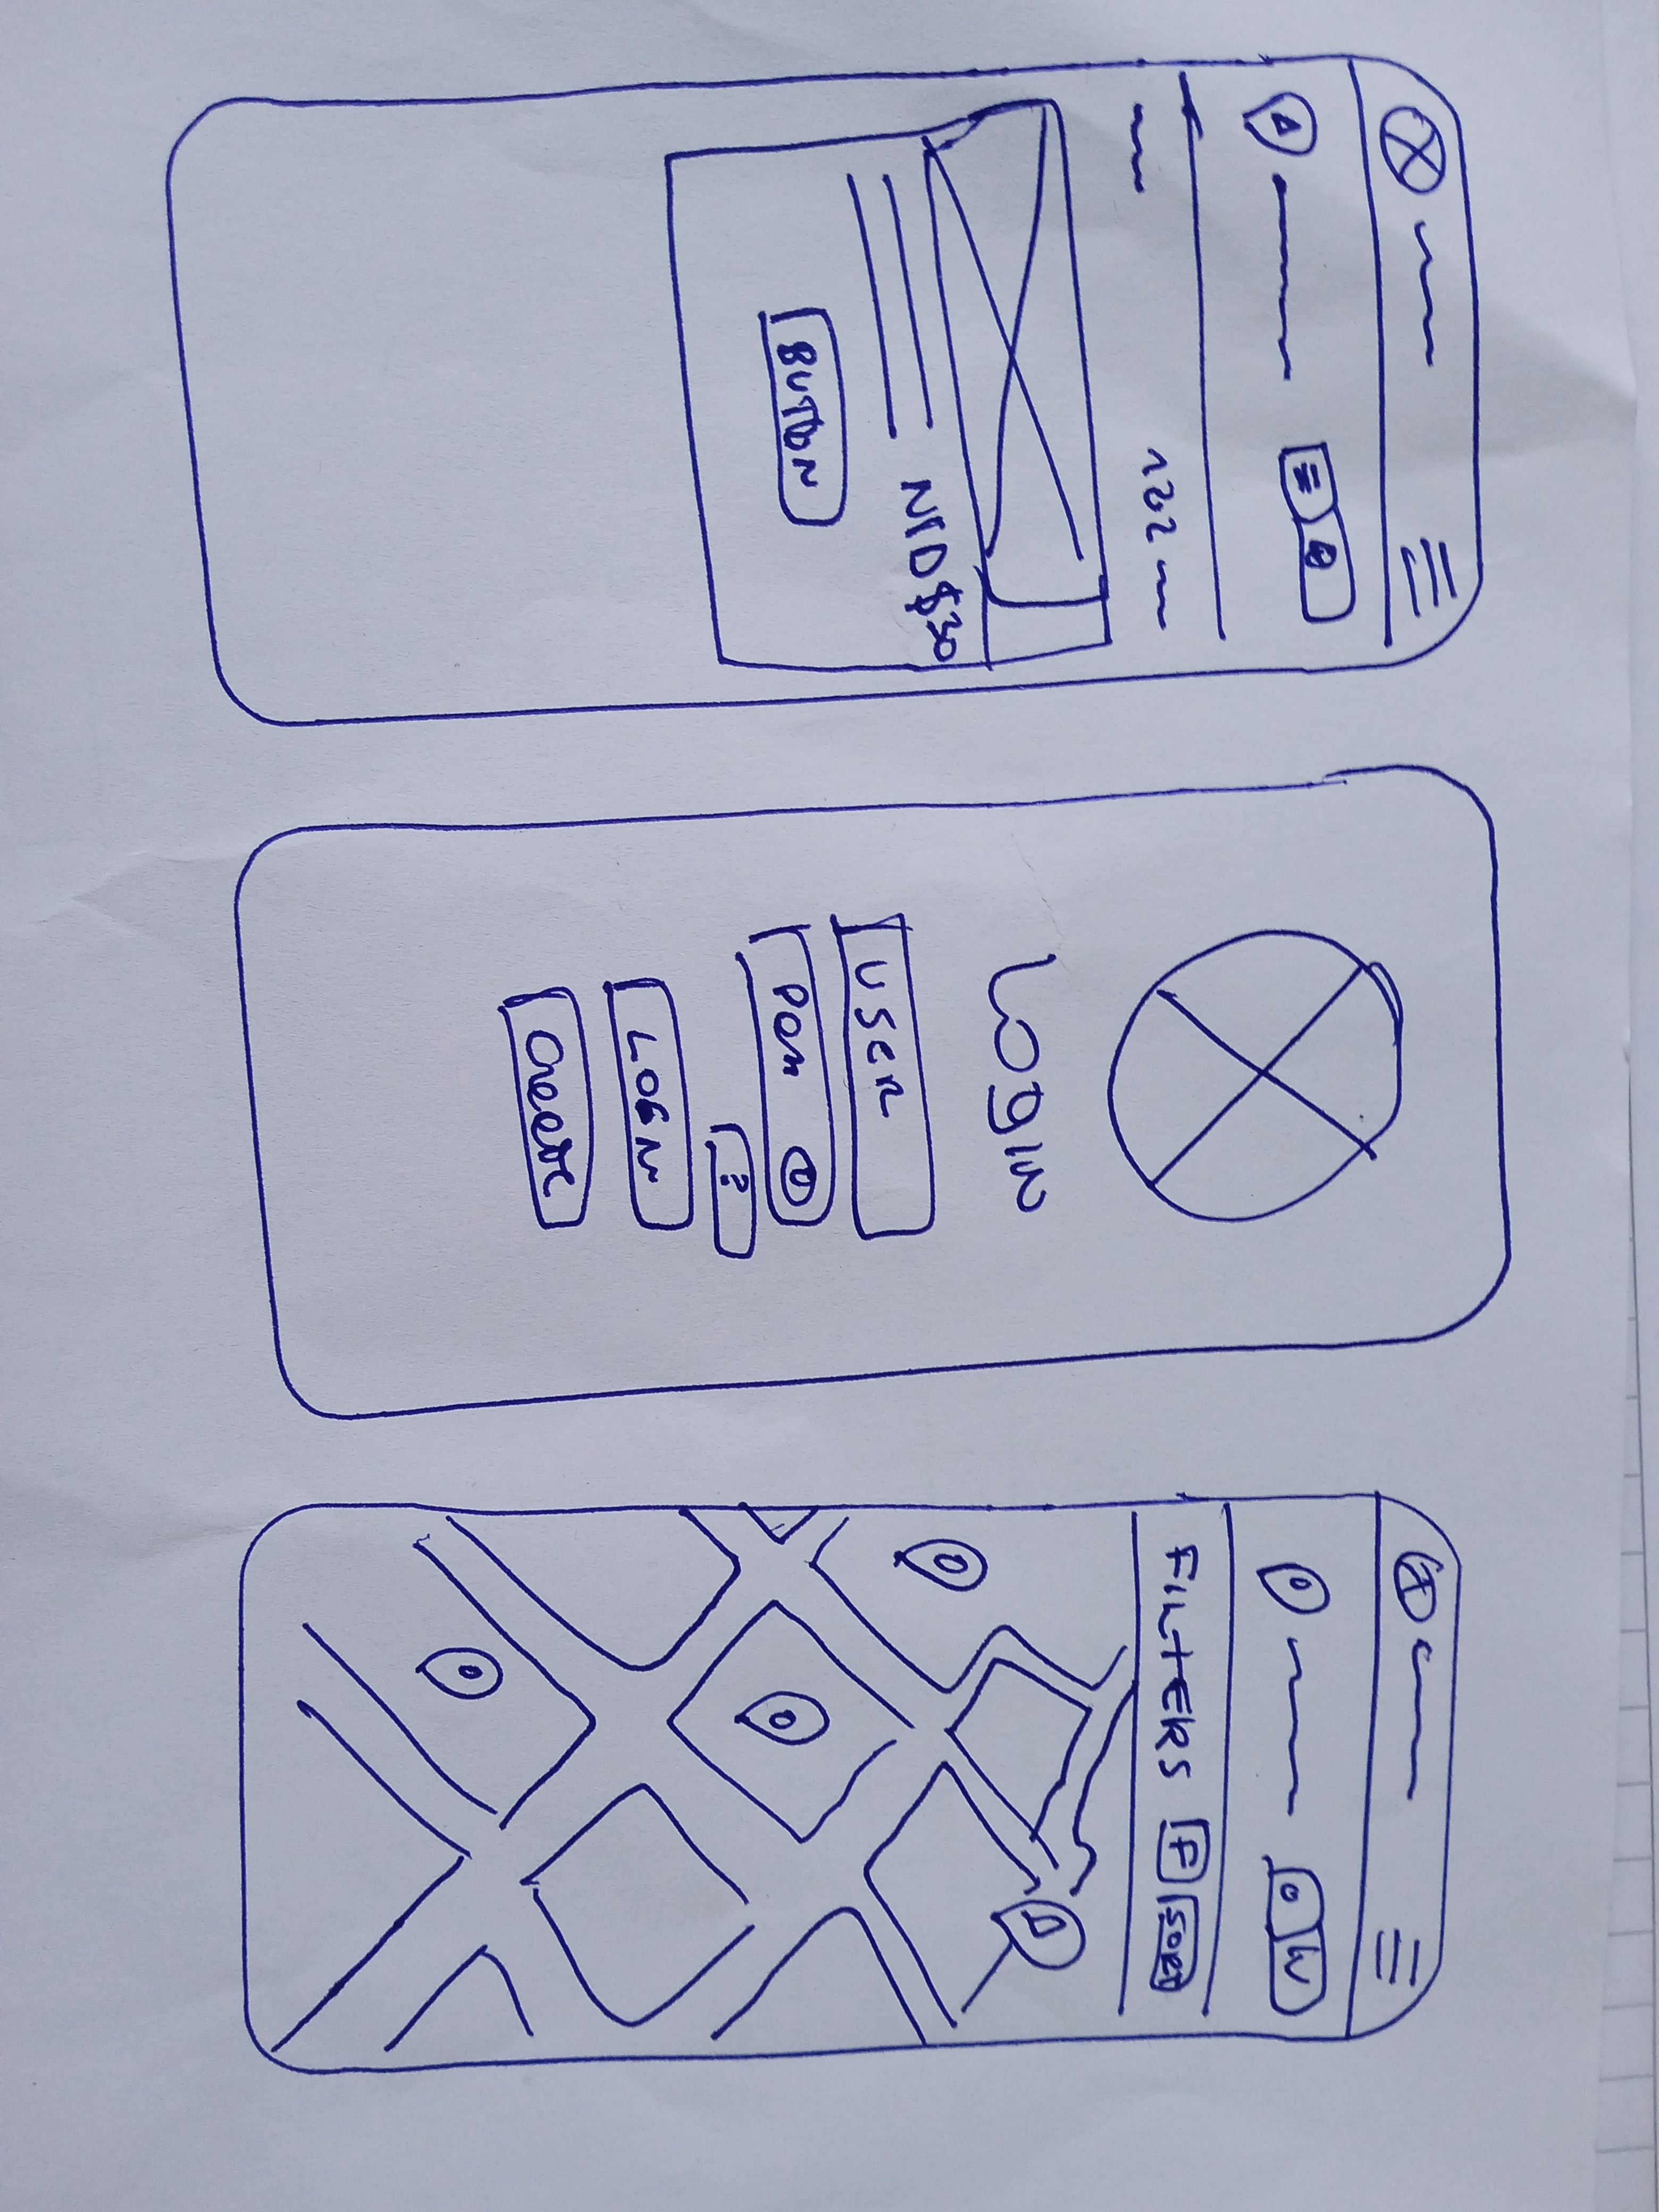 Design of paper prototypes to validate the user experience.